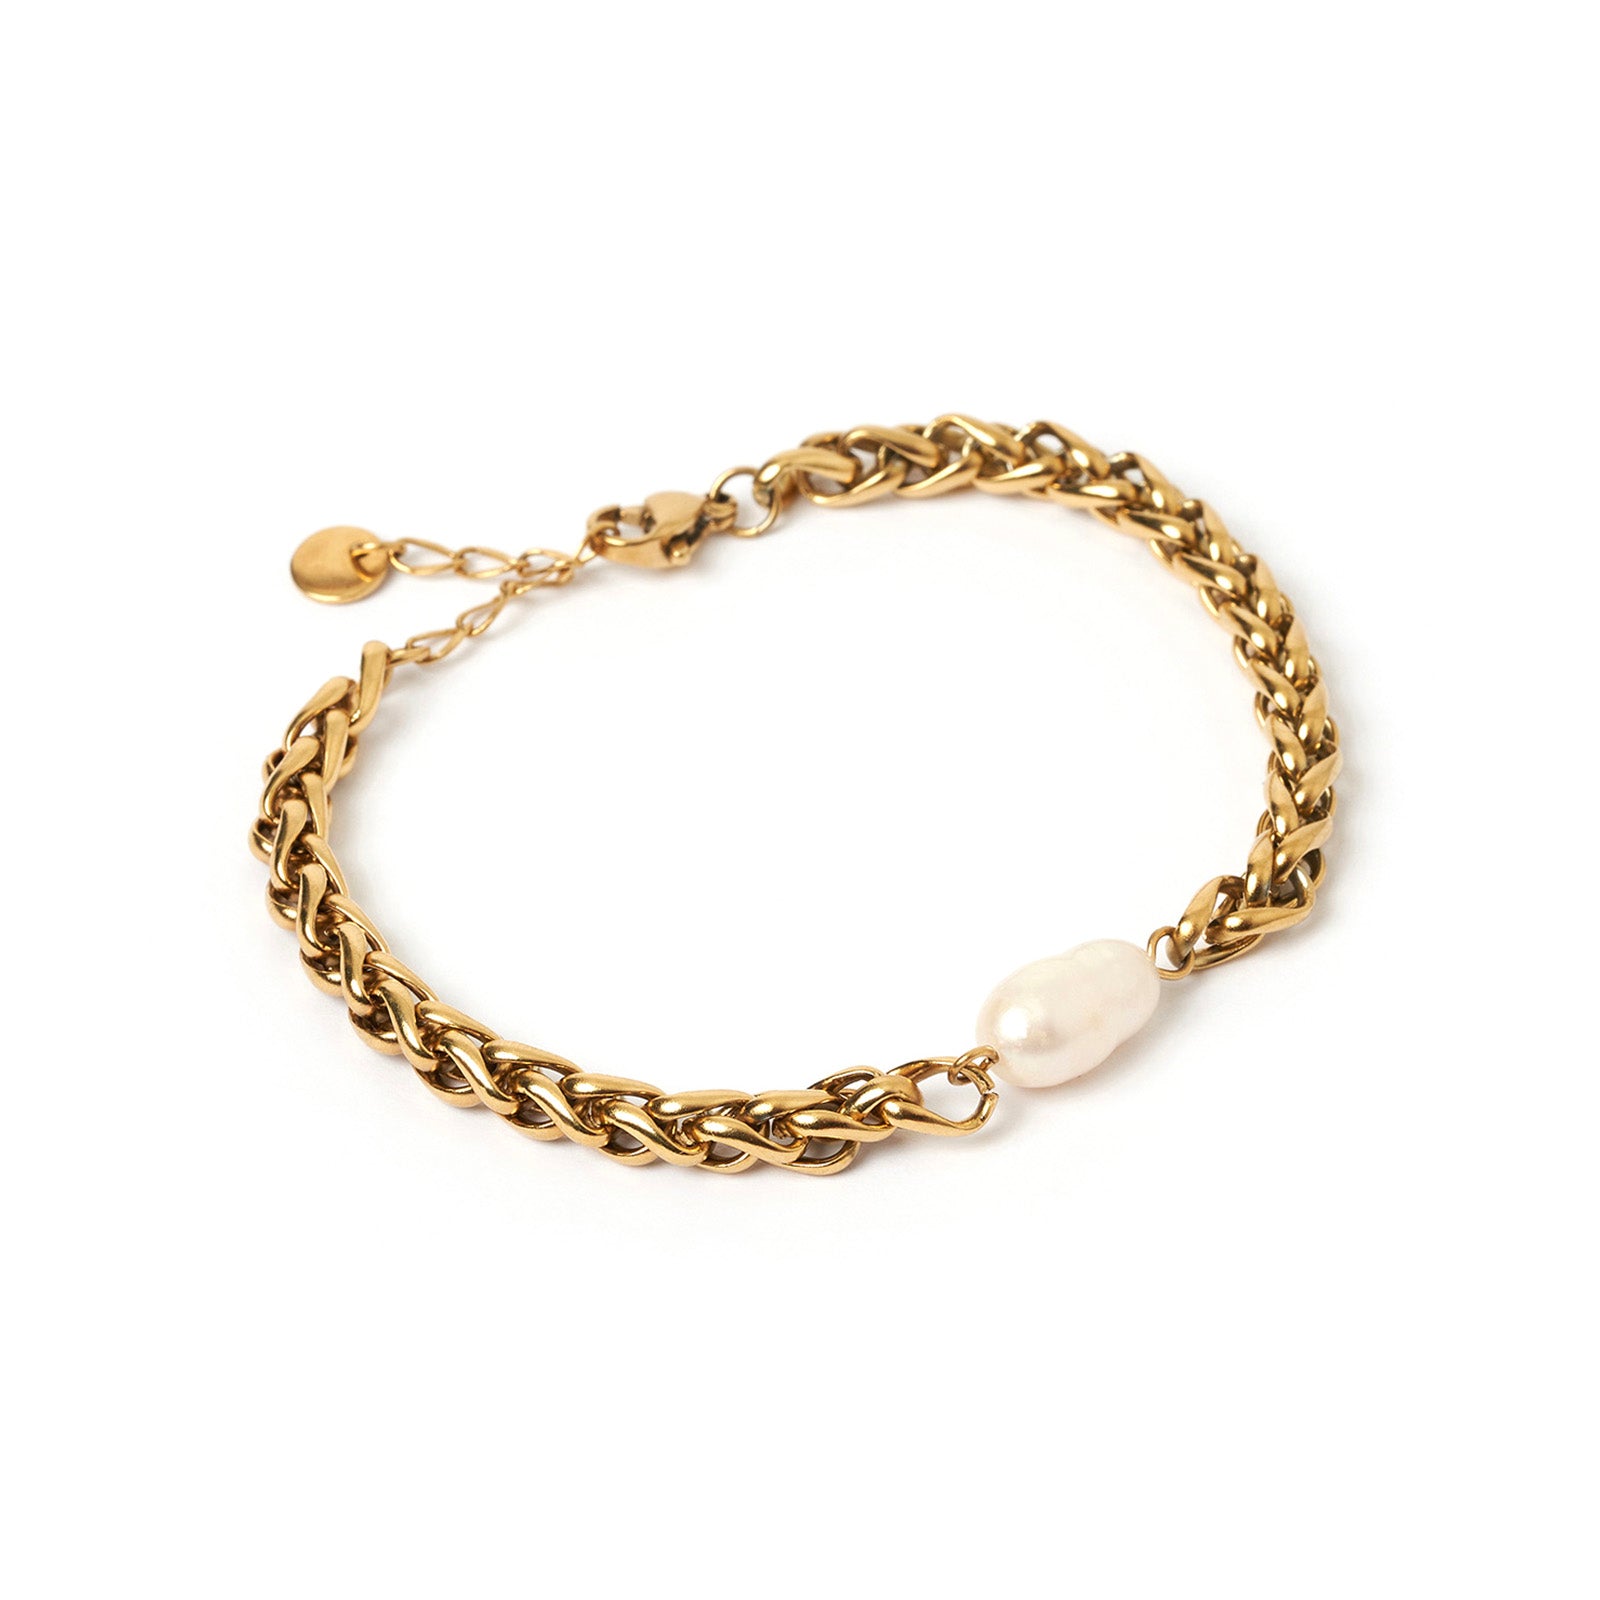 Mia Pearl and Gold Bracelet